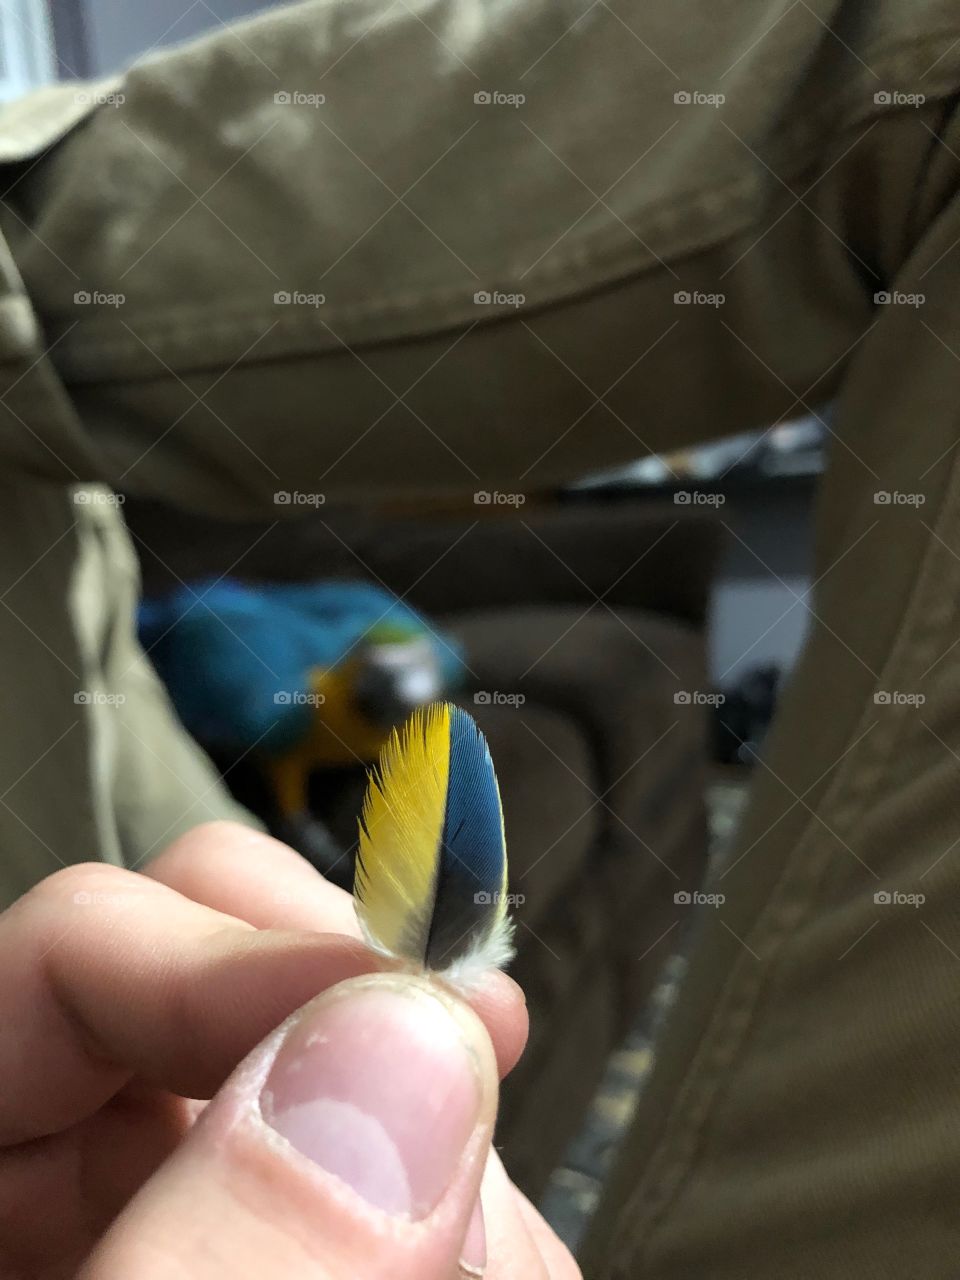 A blue and gold macaw molts a feather that’s perfectly split down the center between blue and yellow